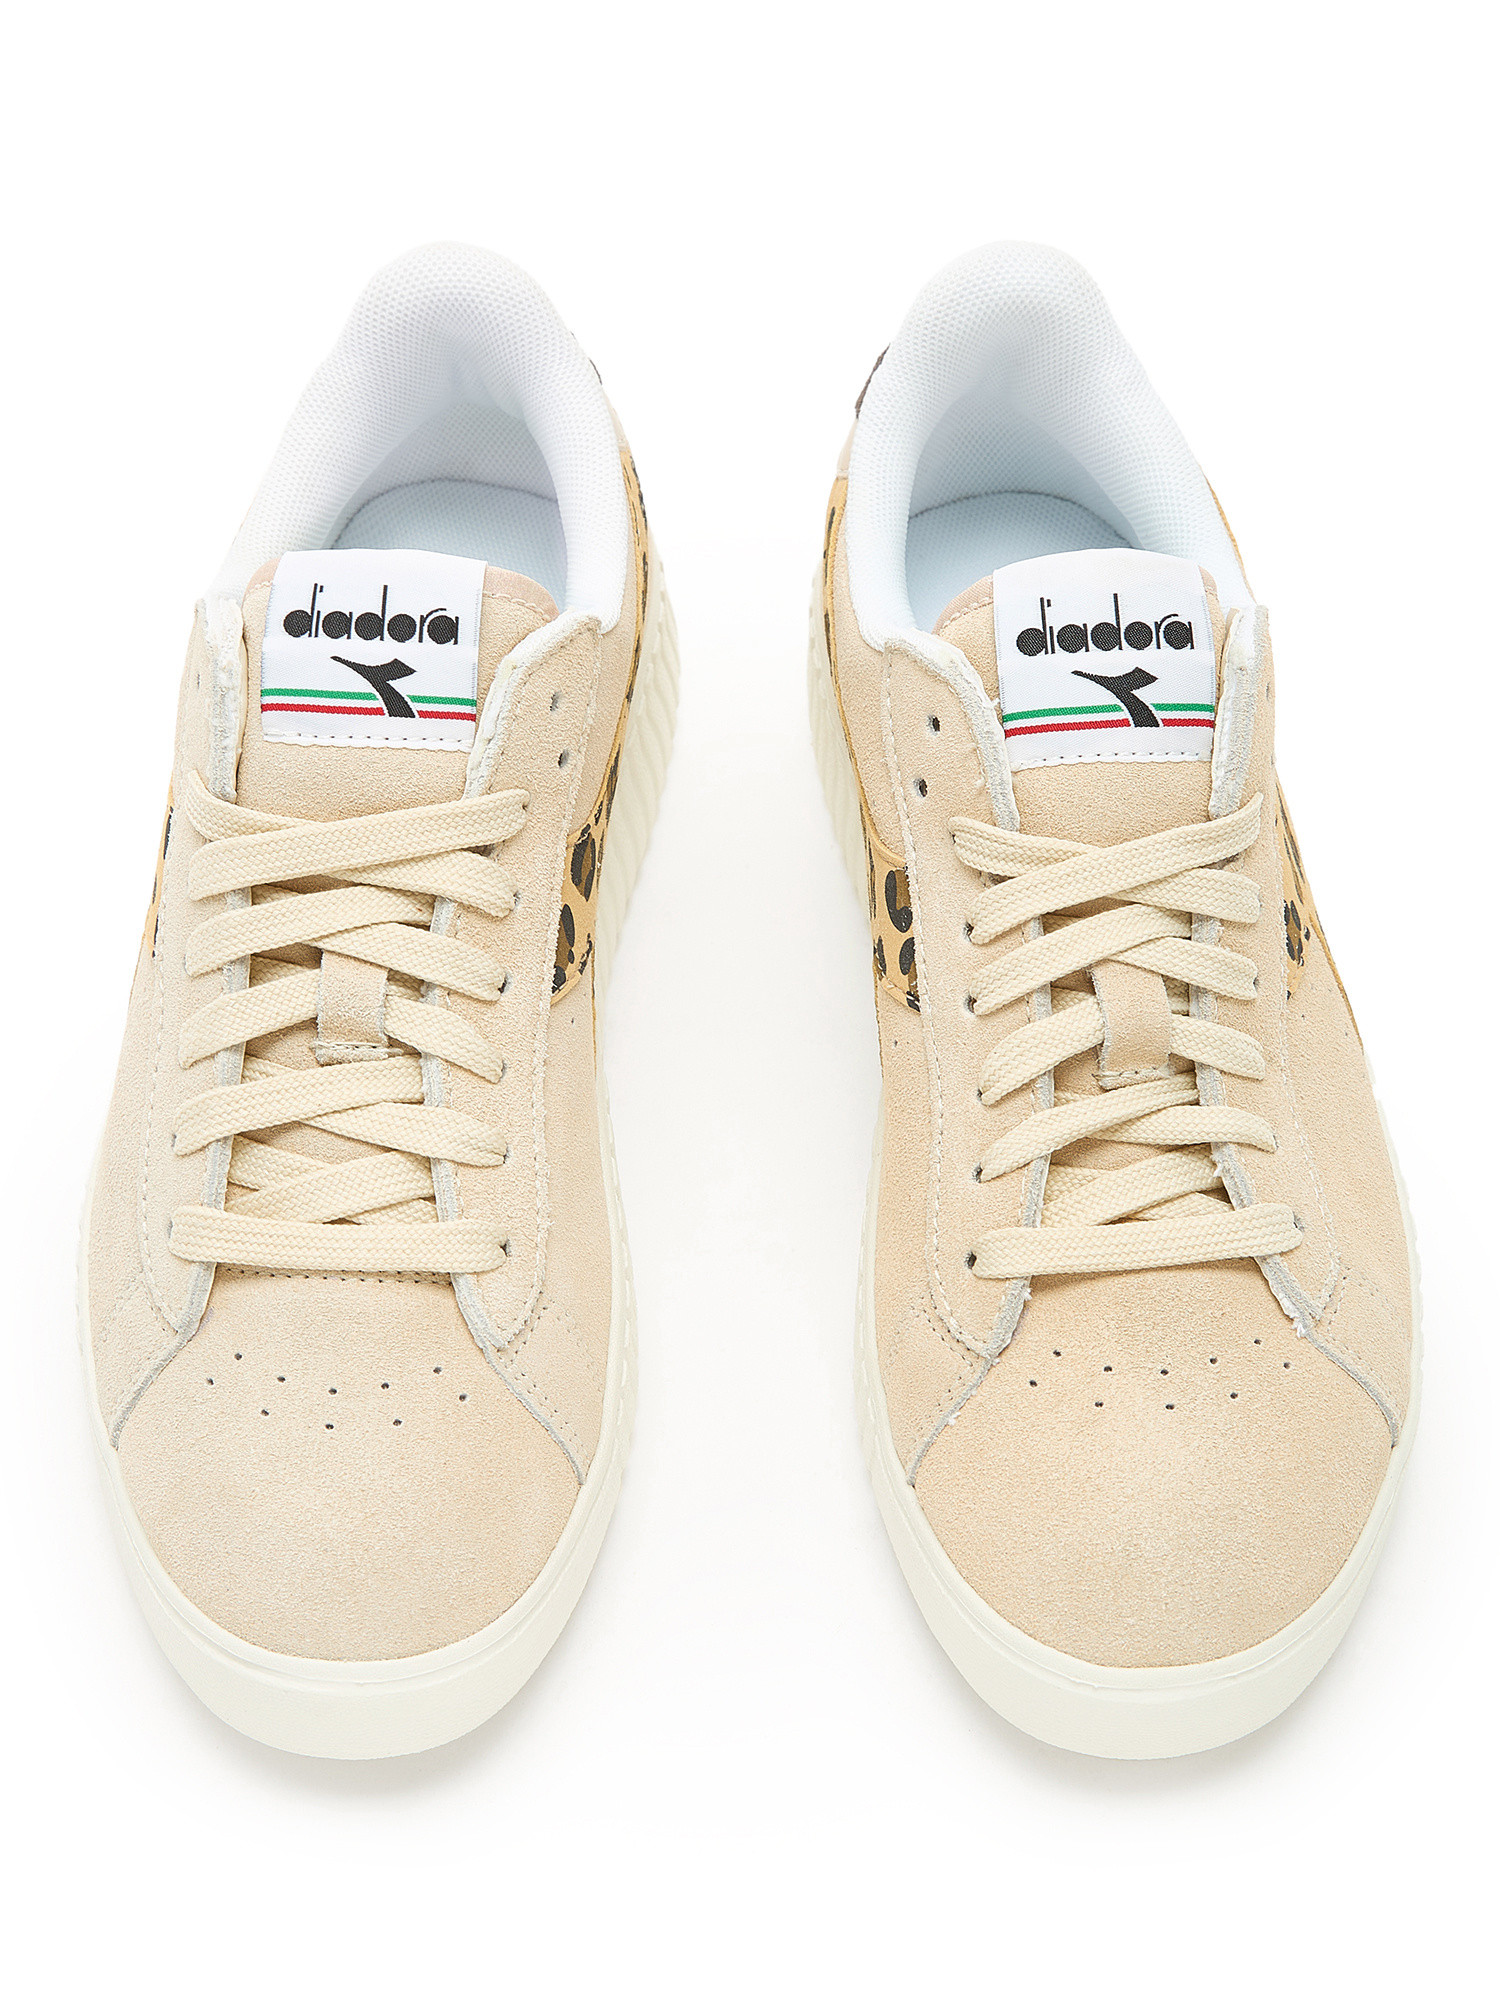 Diadora - Game Step Suede Animalier Shoes, White, large image number 2